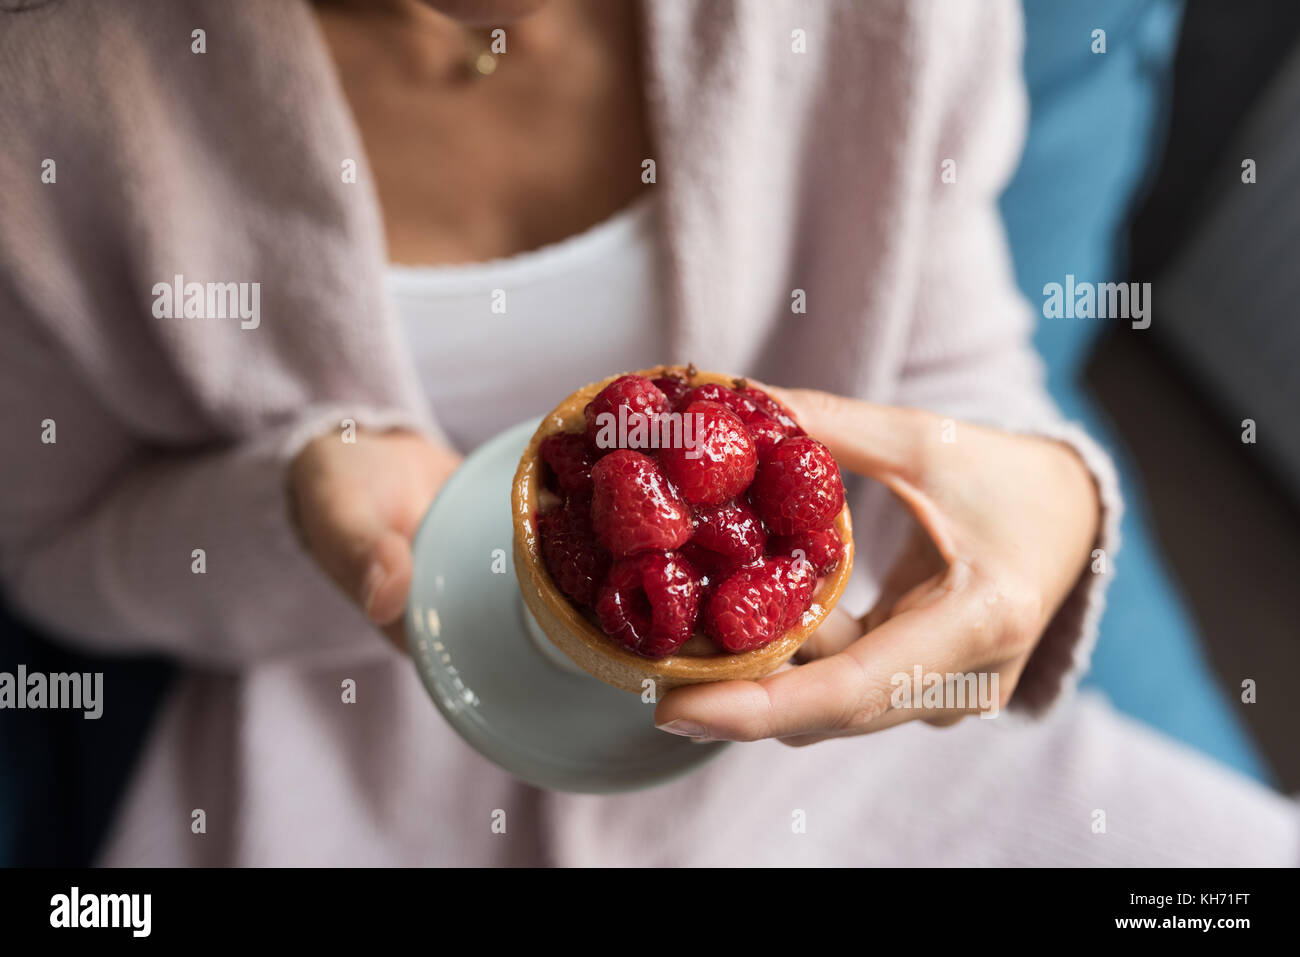 Mid-section of eautiful woman holding dessert Stock Photo